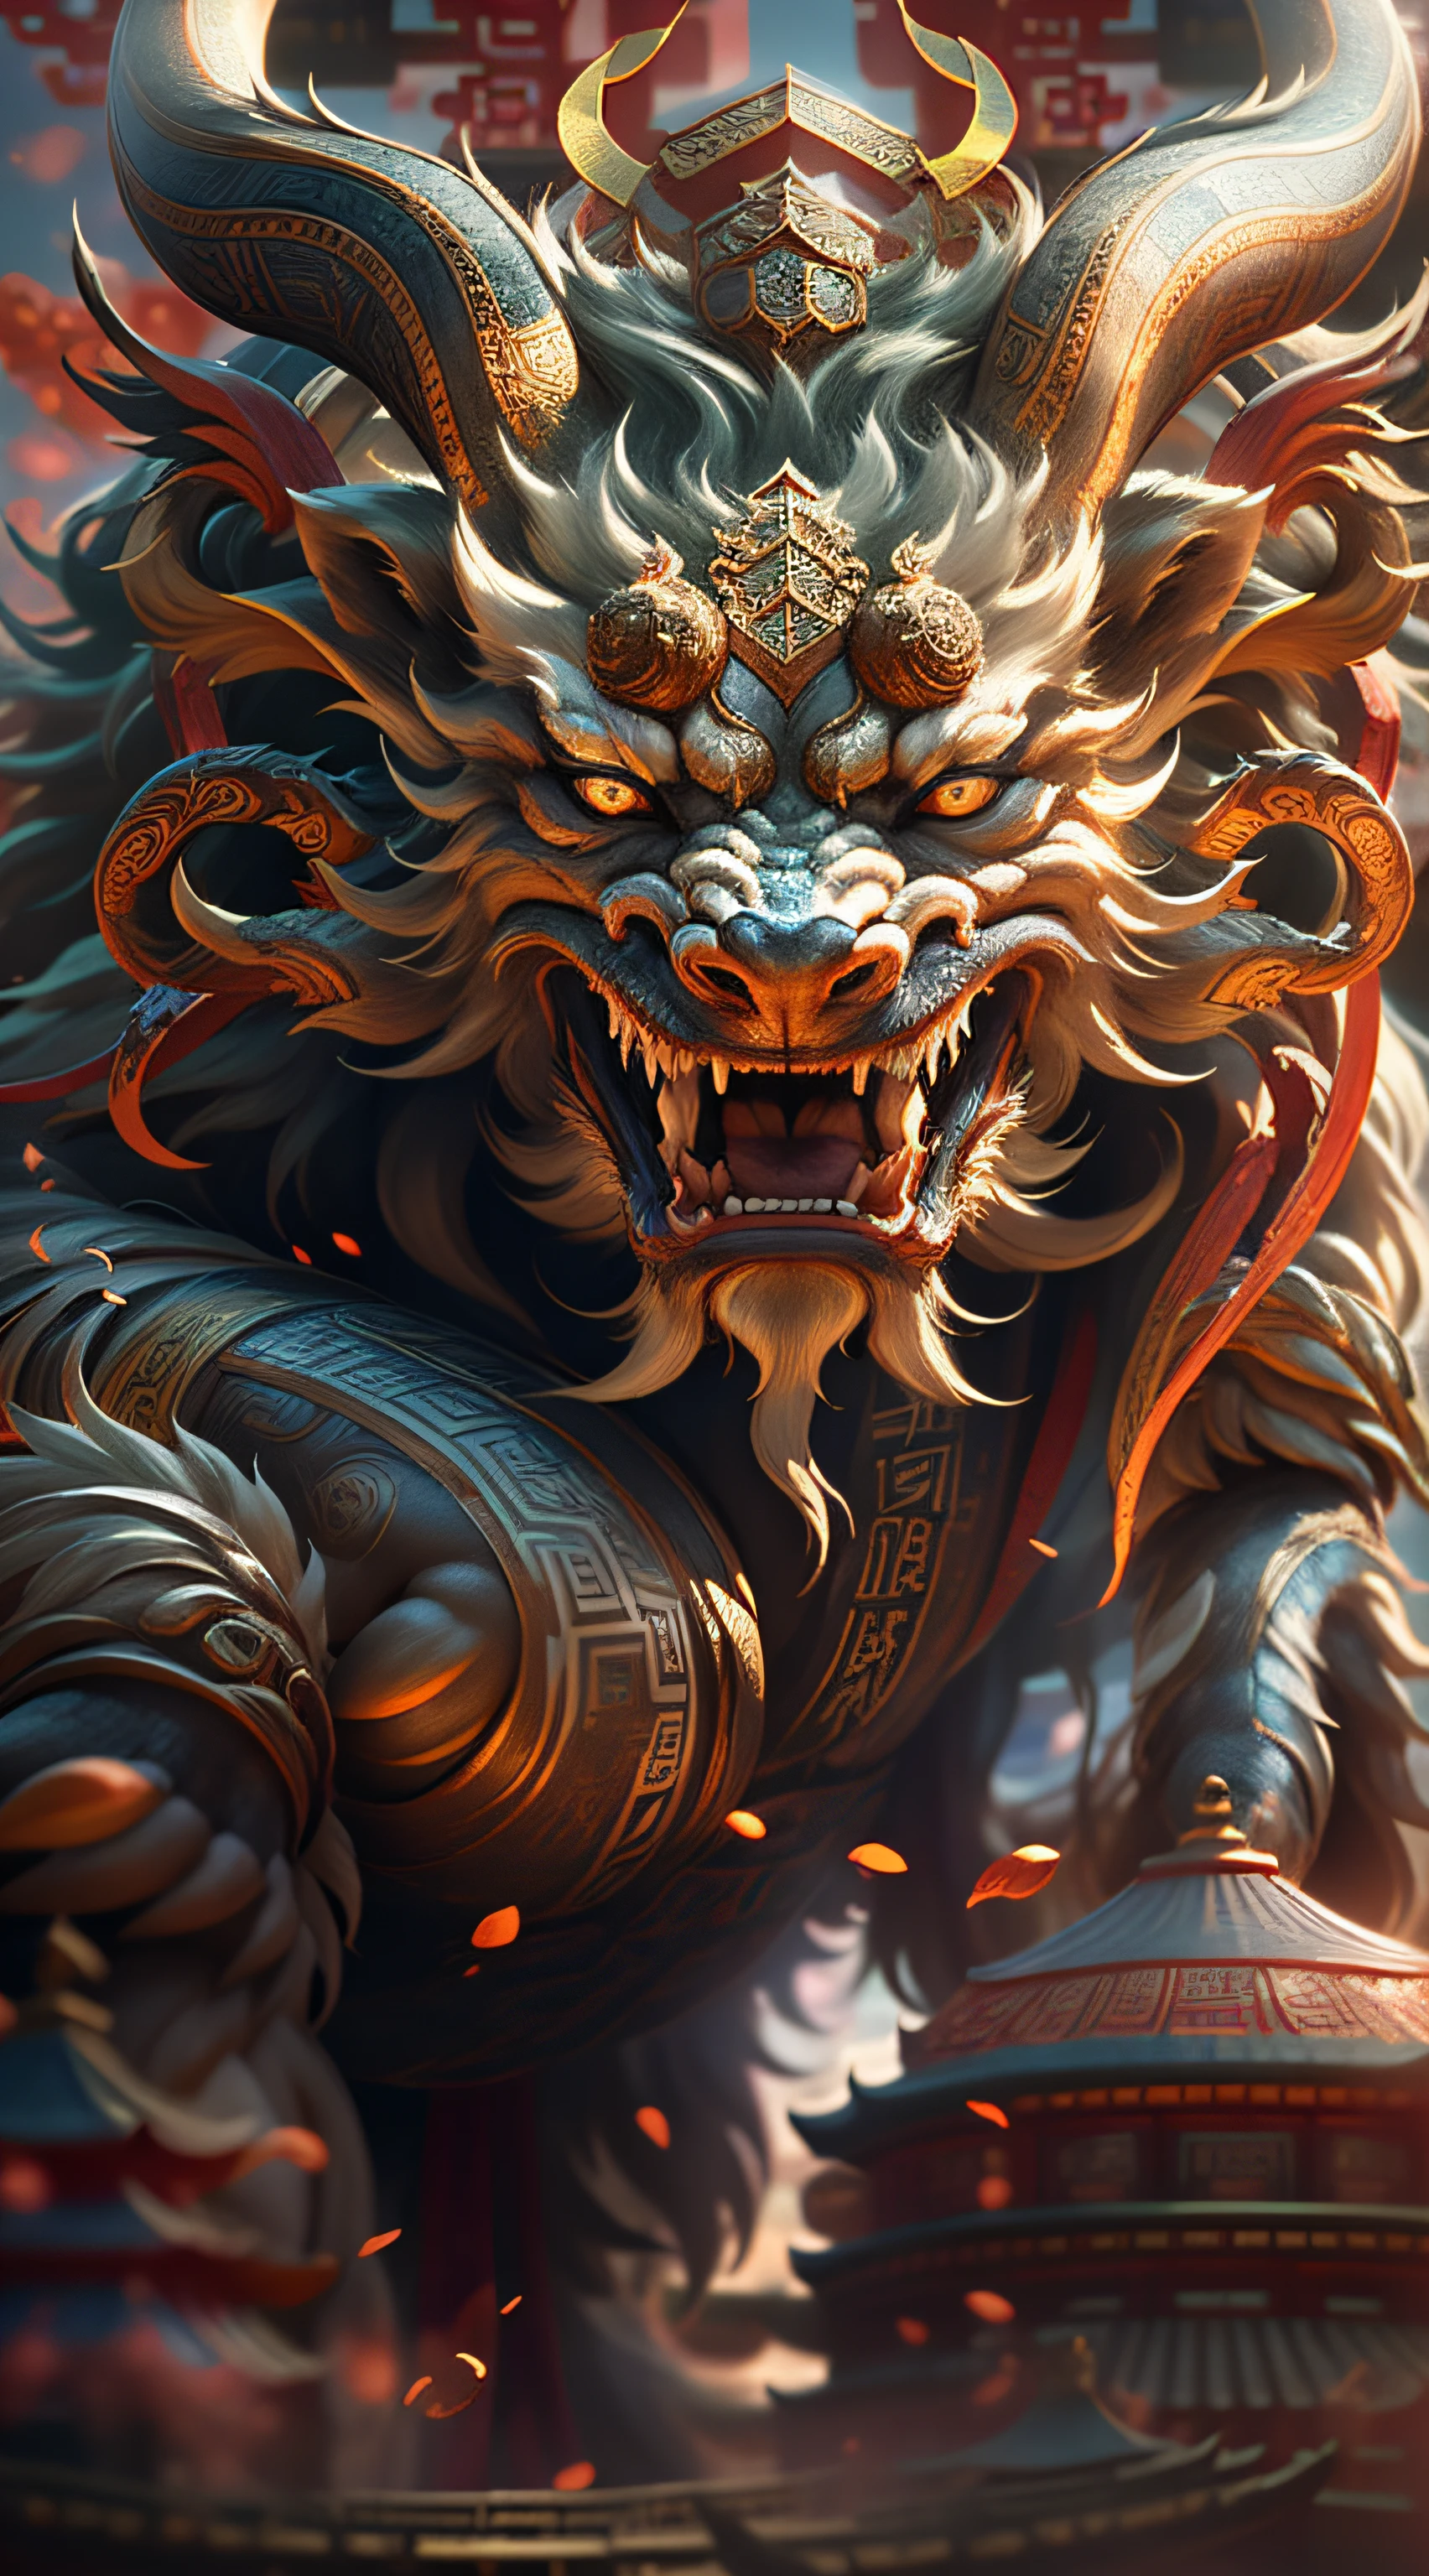 (Chinese ancient mythical beast + Chinese mythology + full of vitality), ultra-realistic 3D rendering, (masterpiece + best quality + high-detail), marvel at the figure, realistic performance of photography award-winning level + reproduction of the best visual effects, perfect shooting, get an eye-catching movie poster! Clear focus, depth of field.